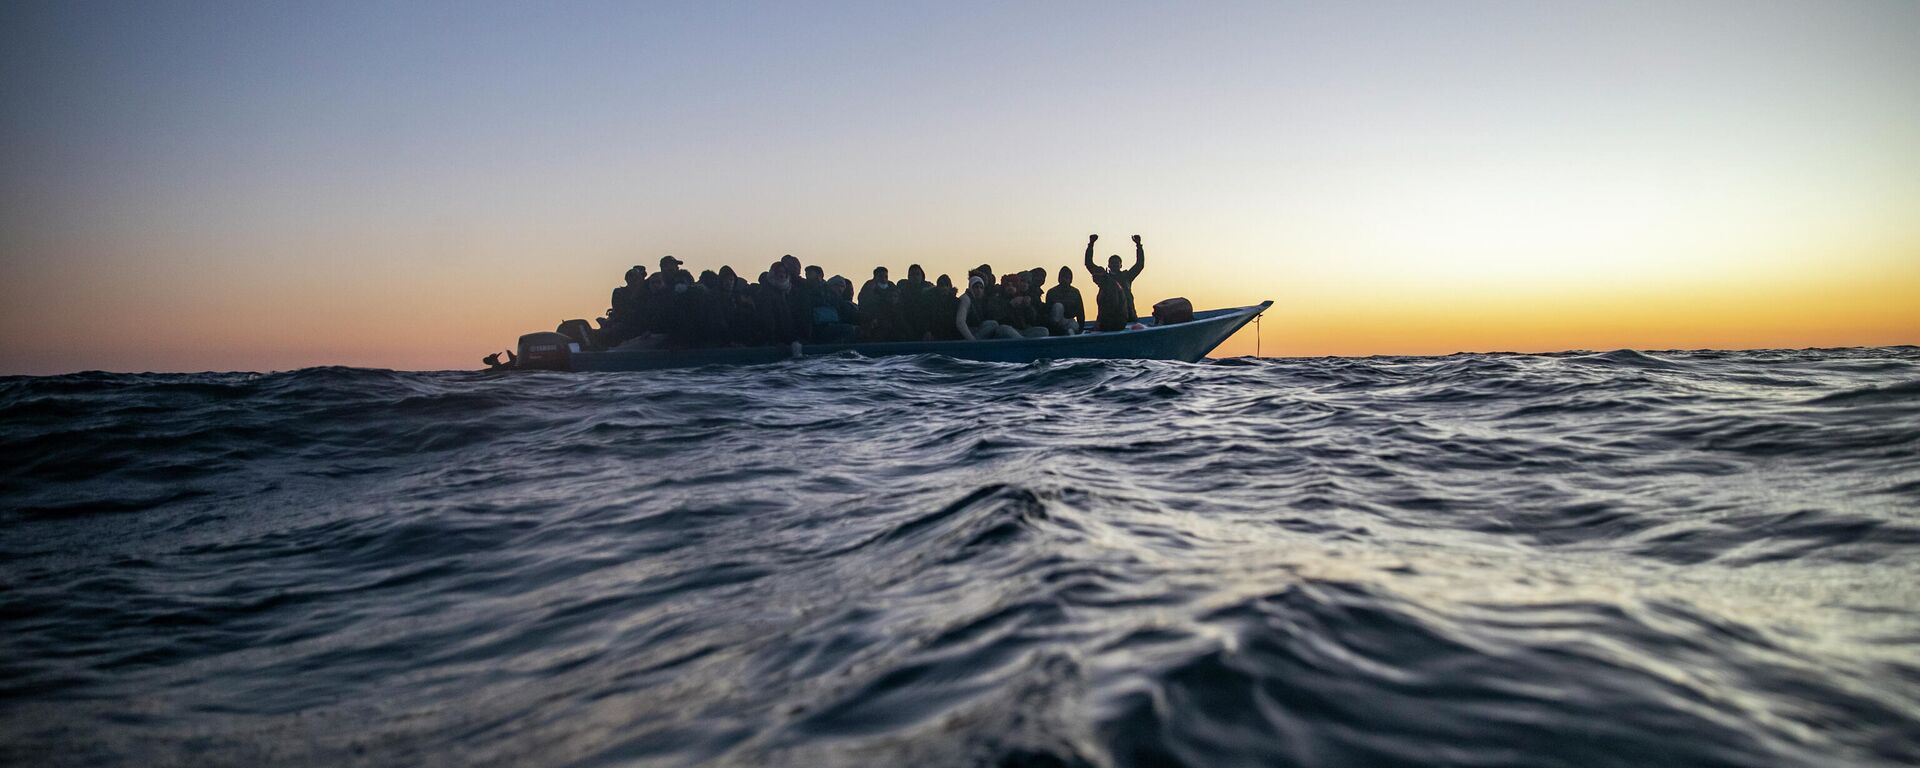 Migrants and refugees of various African nationalities wait for assistance aboard an overcrowded wooden boat in the Mediterranean Sea 122 miles off the coast of Libya as aid workers on the Spanish search and rescue vessel Open Arms approach on Feb. 12, 2021. - Sputnik International, 1920, 26.12.2021